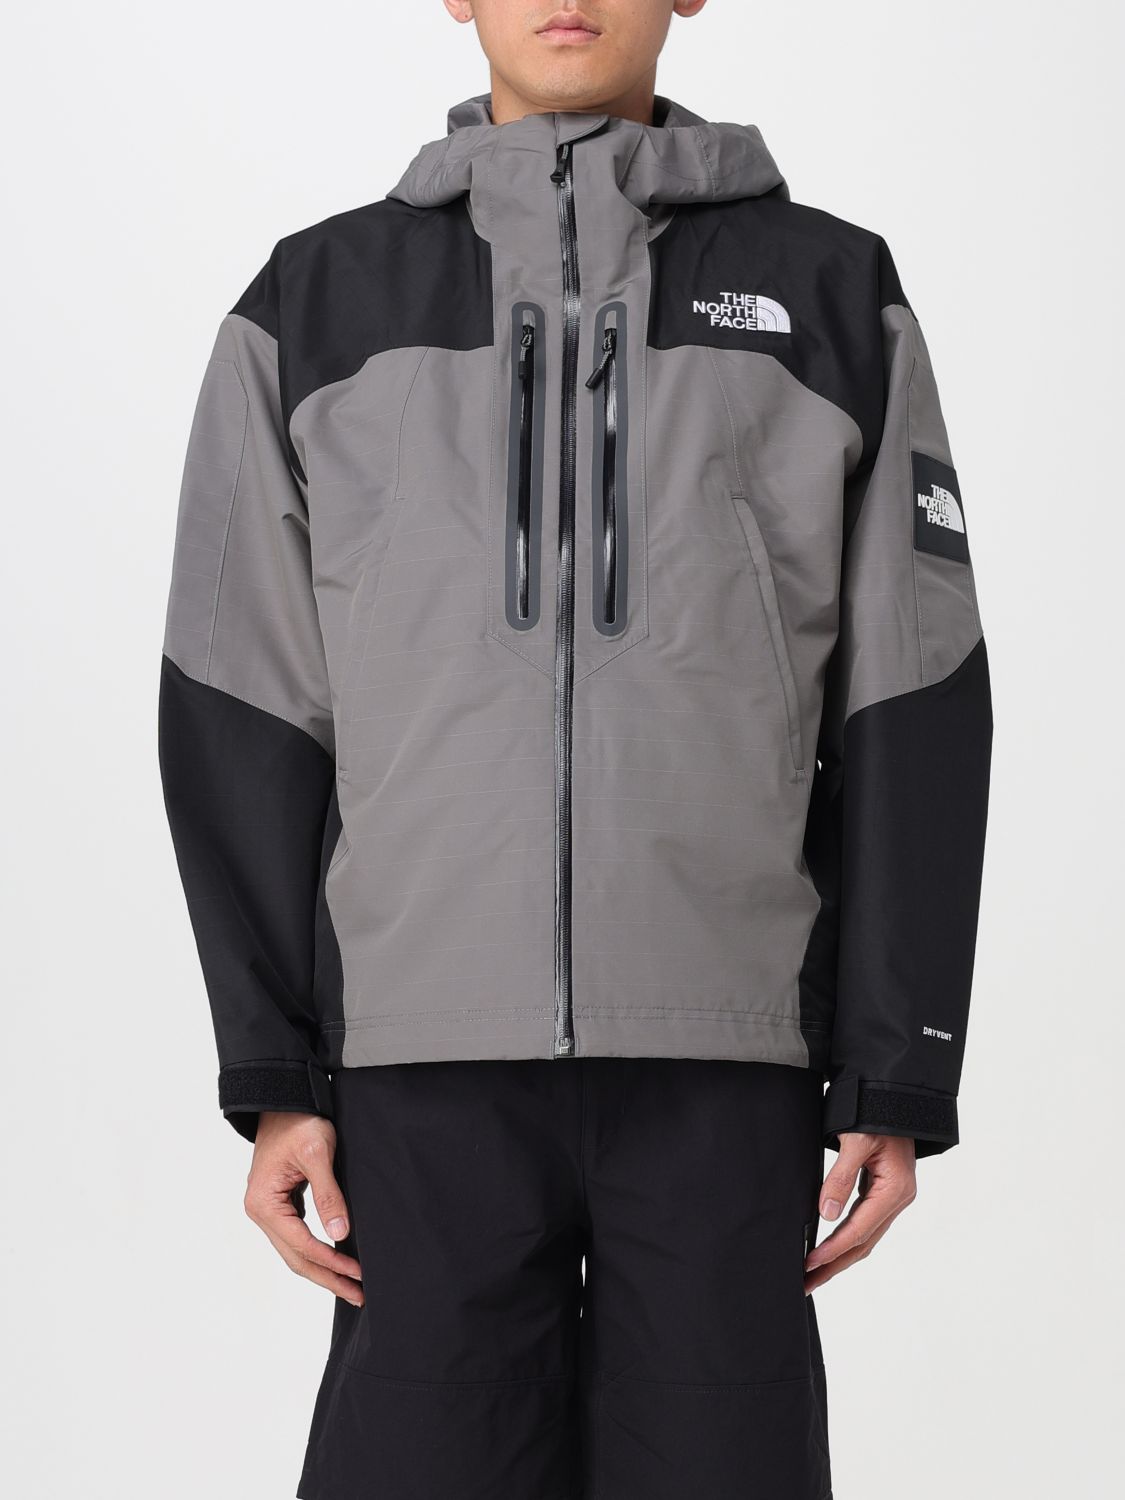 The North Face Jacket THE NORTH FACE Men color White